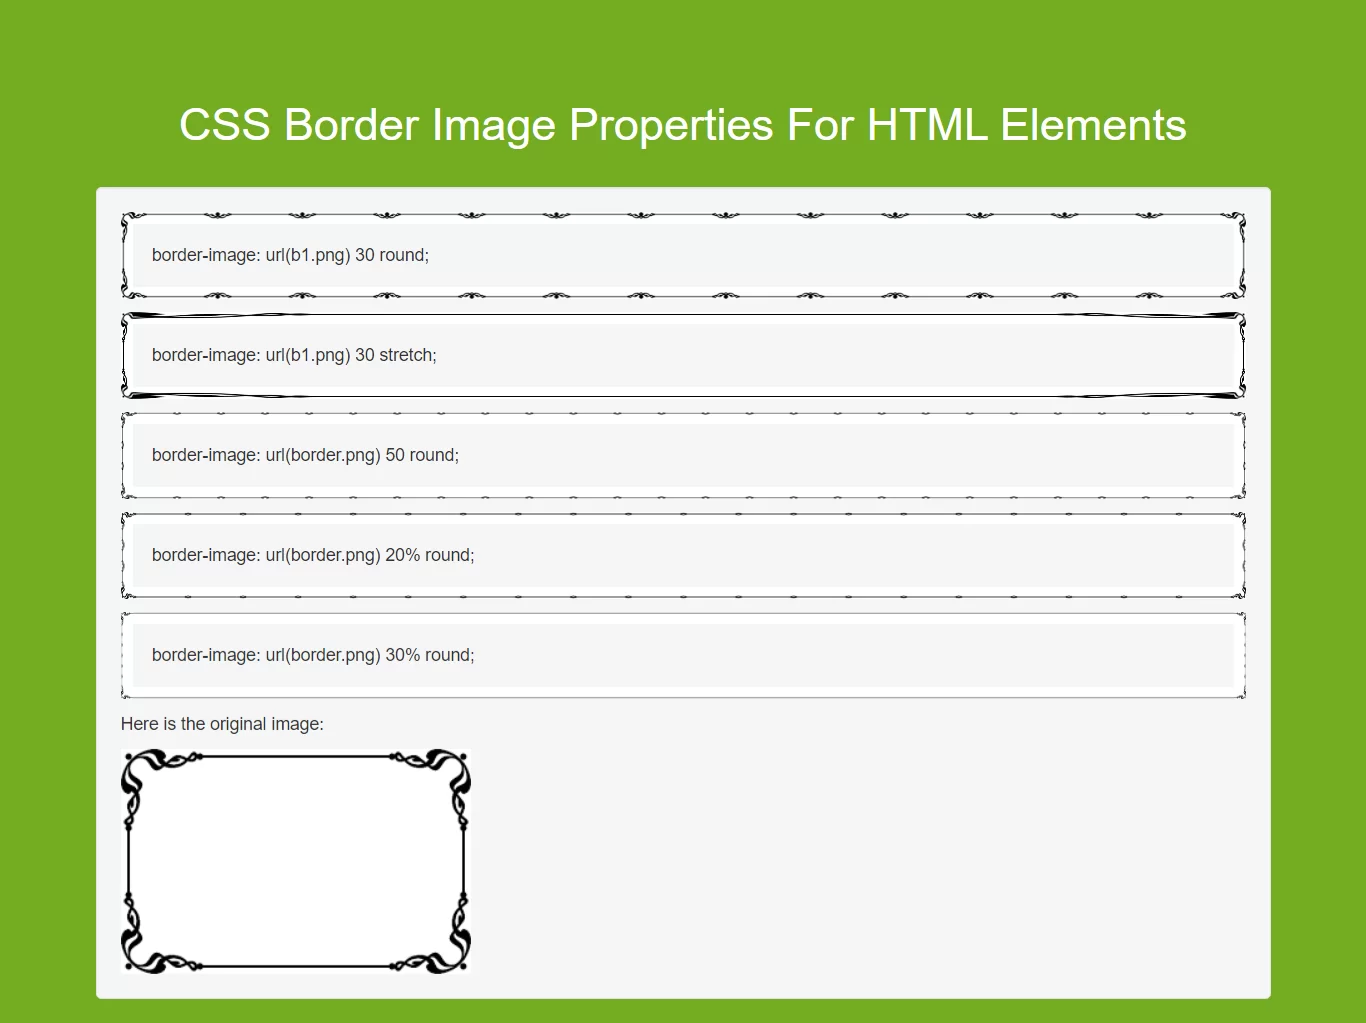 How To Use CSS Border Image Properties For HTML Elements